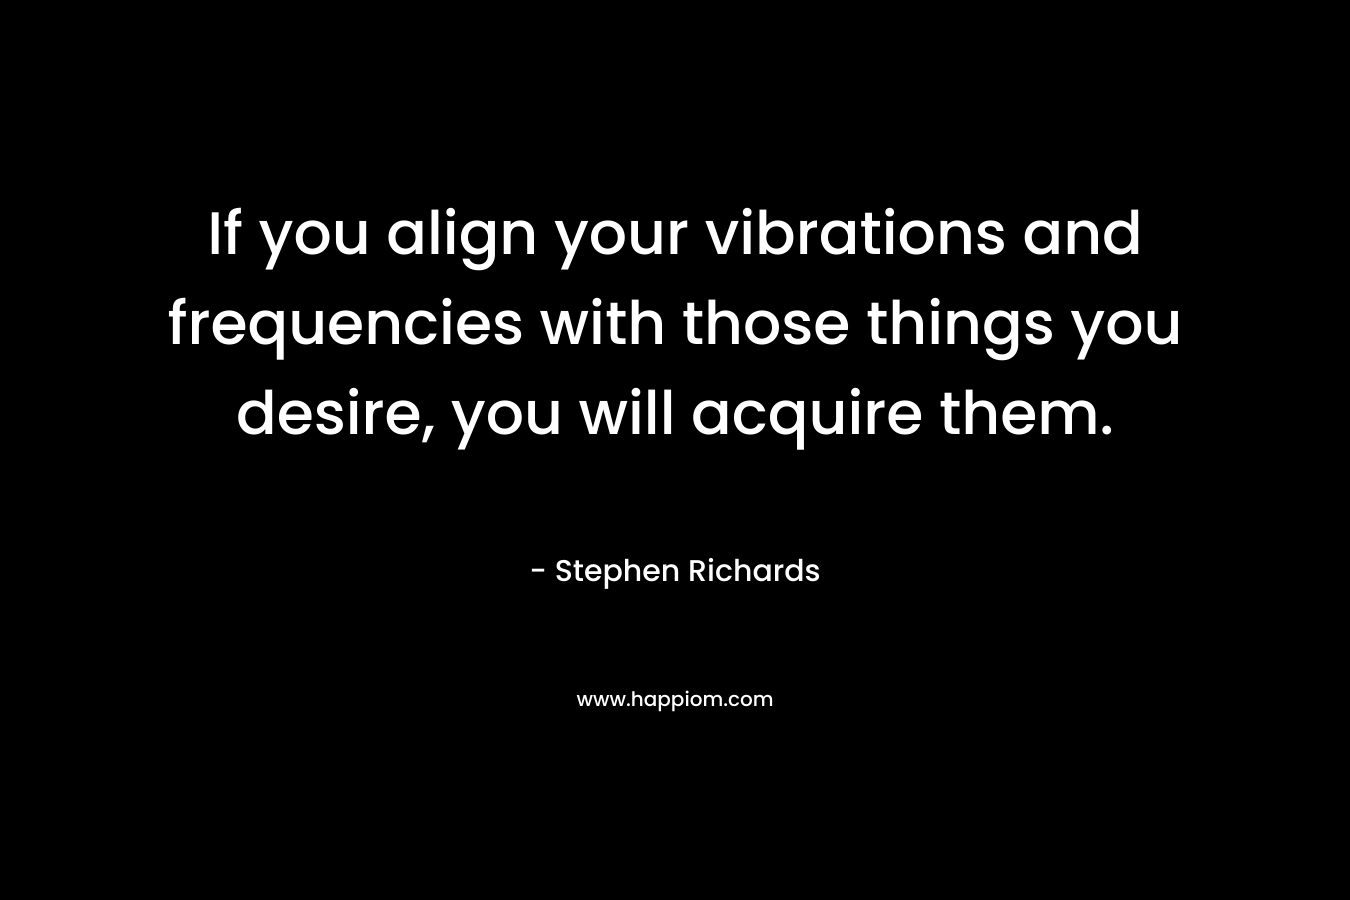 If you align your vibrations and frequencies with those things you desire, you will acquire them.